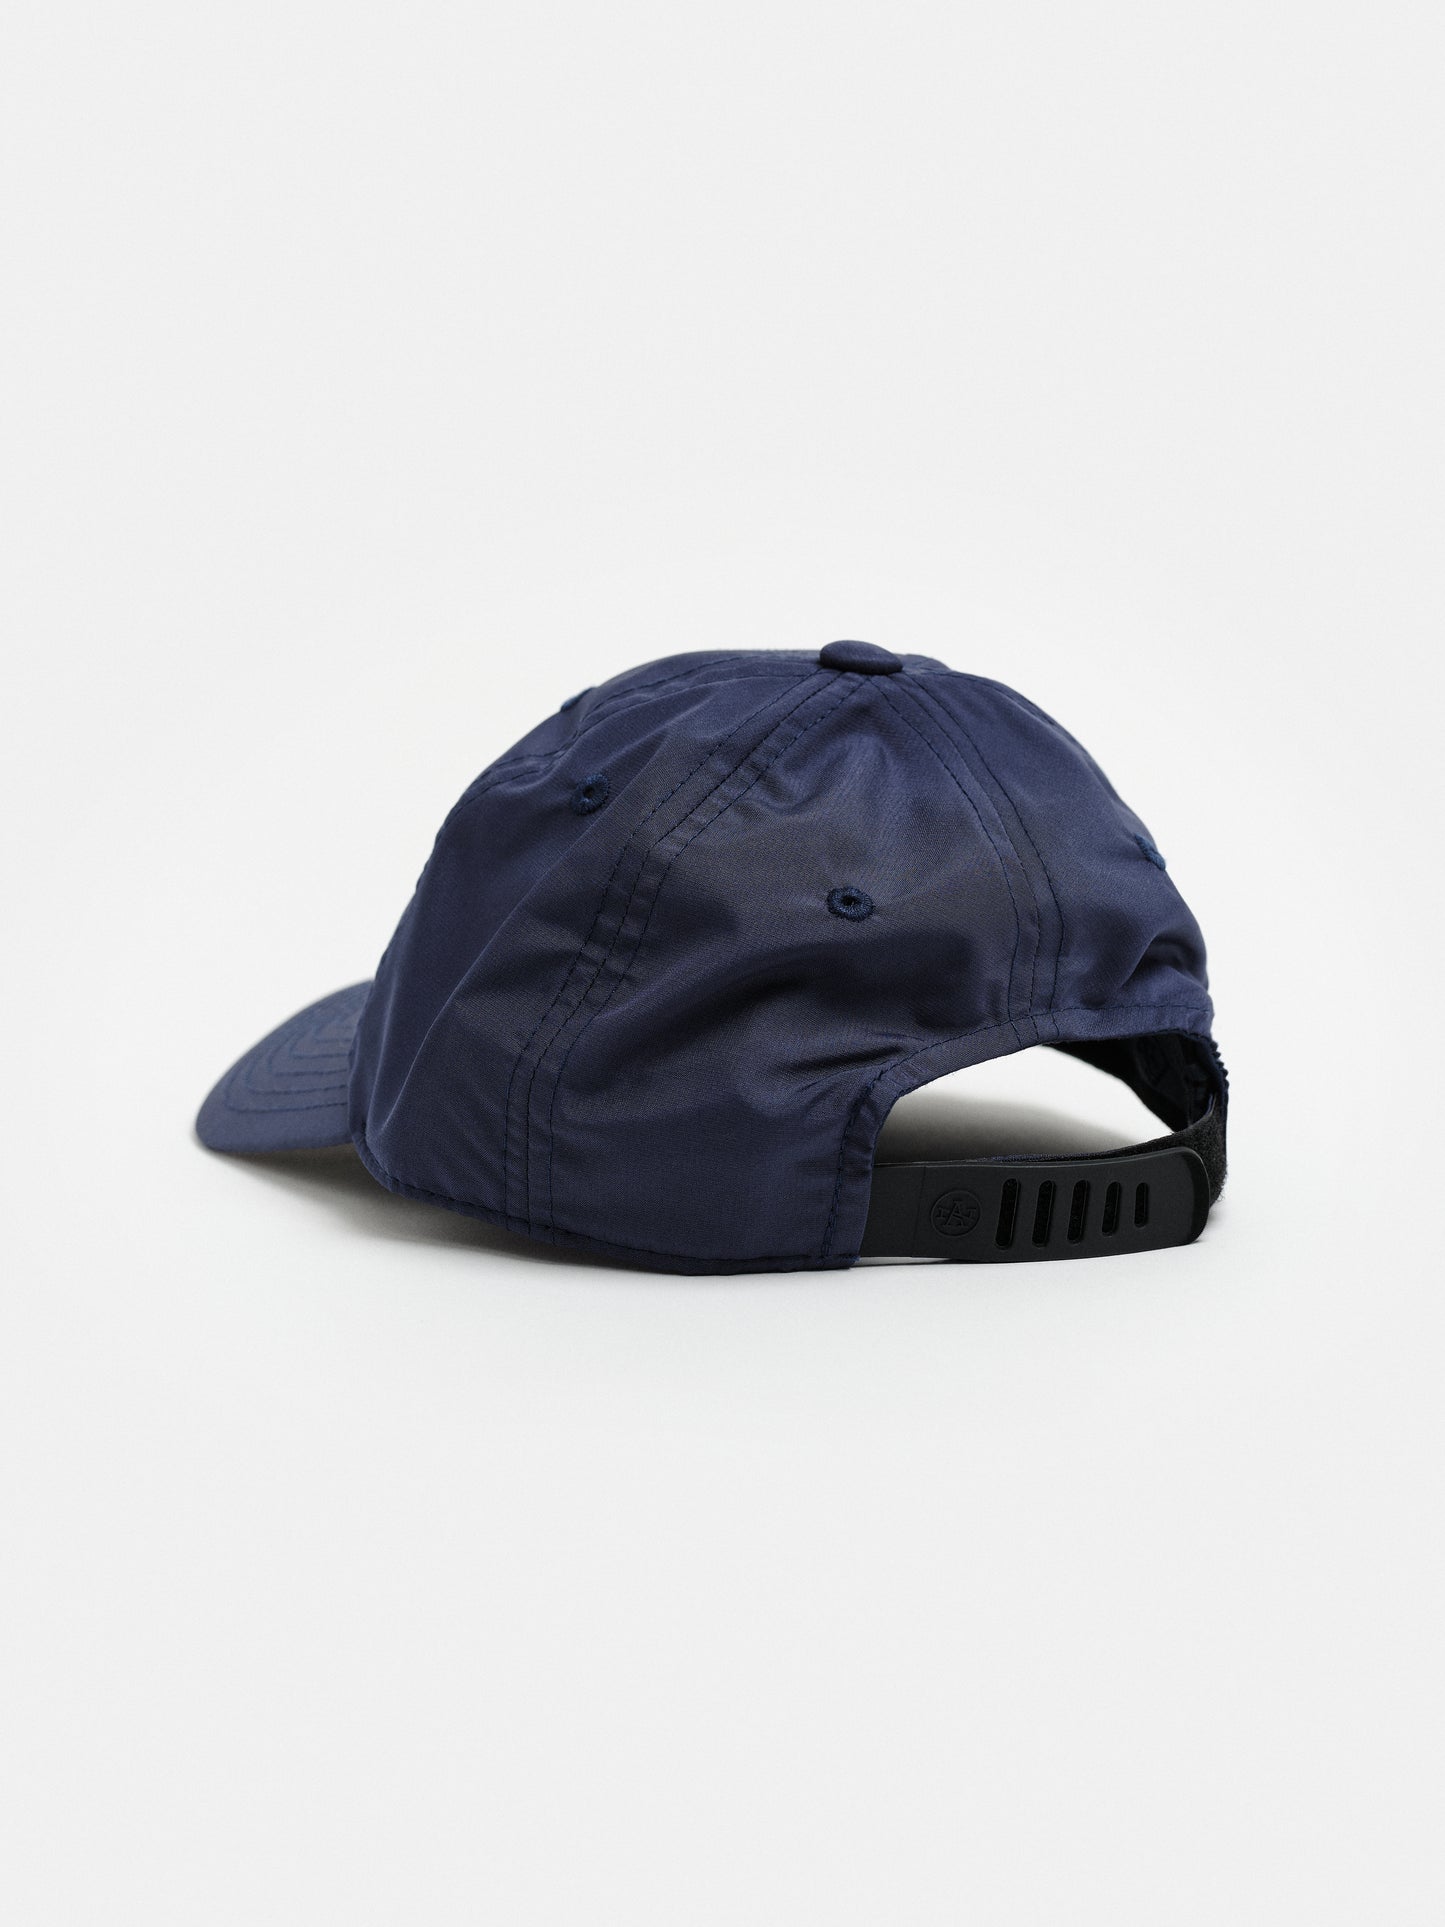 Performance Youth Golf Hat in Navy